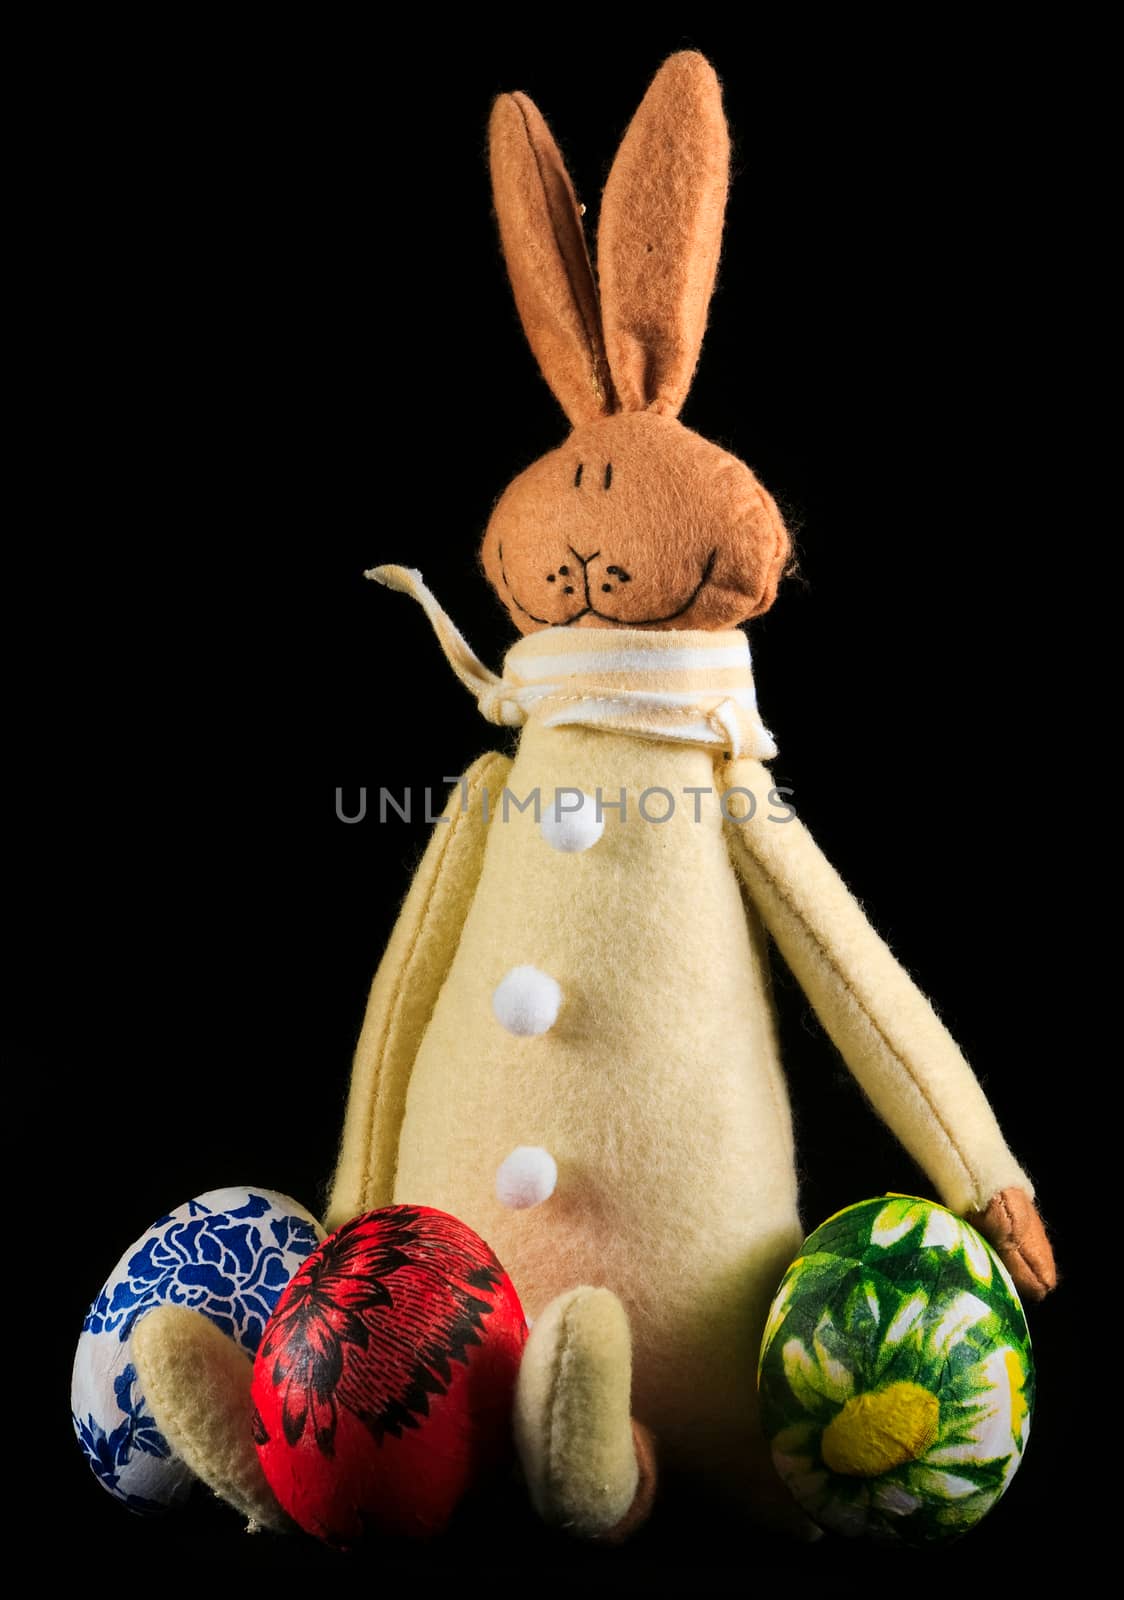 Eggs painted by hand with hare isolated on black background by mrakor